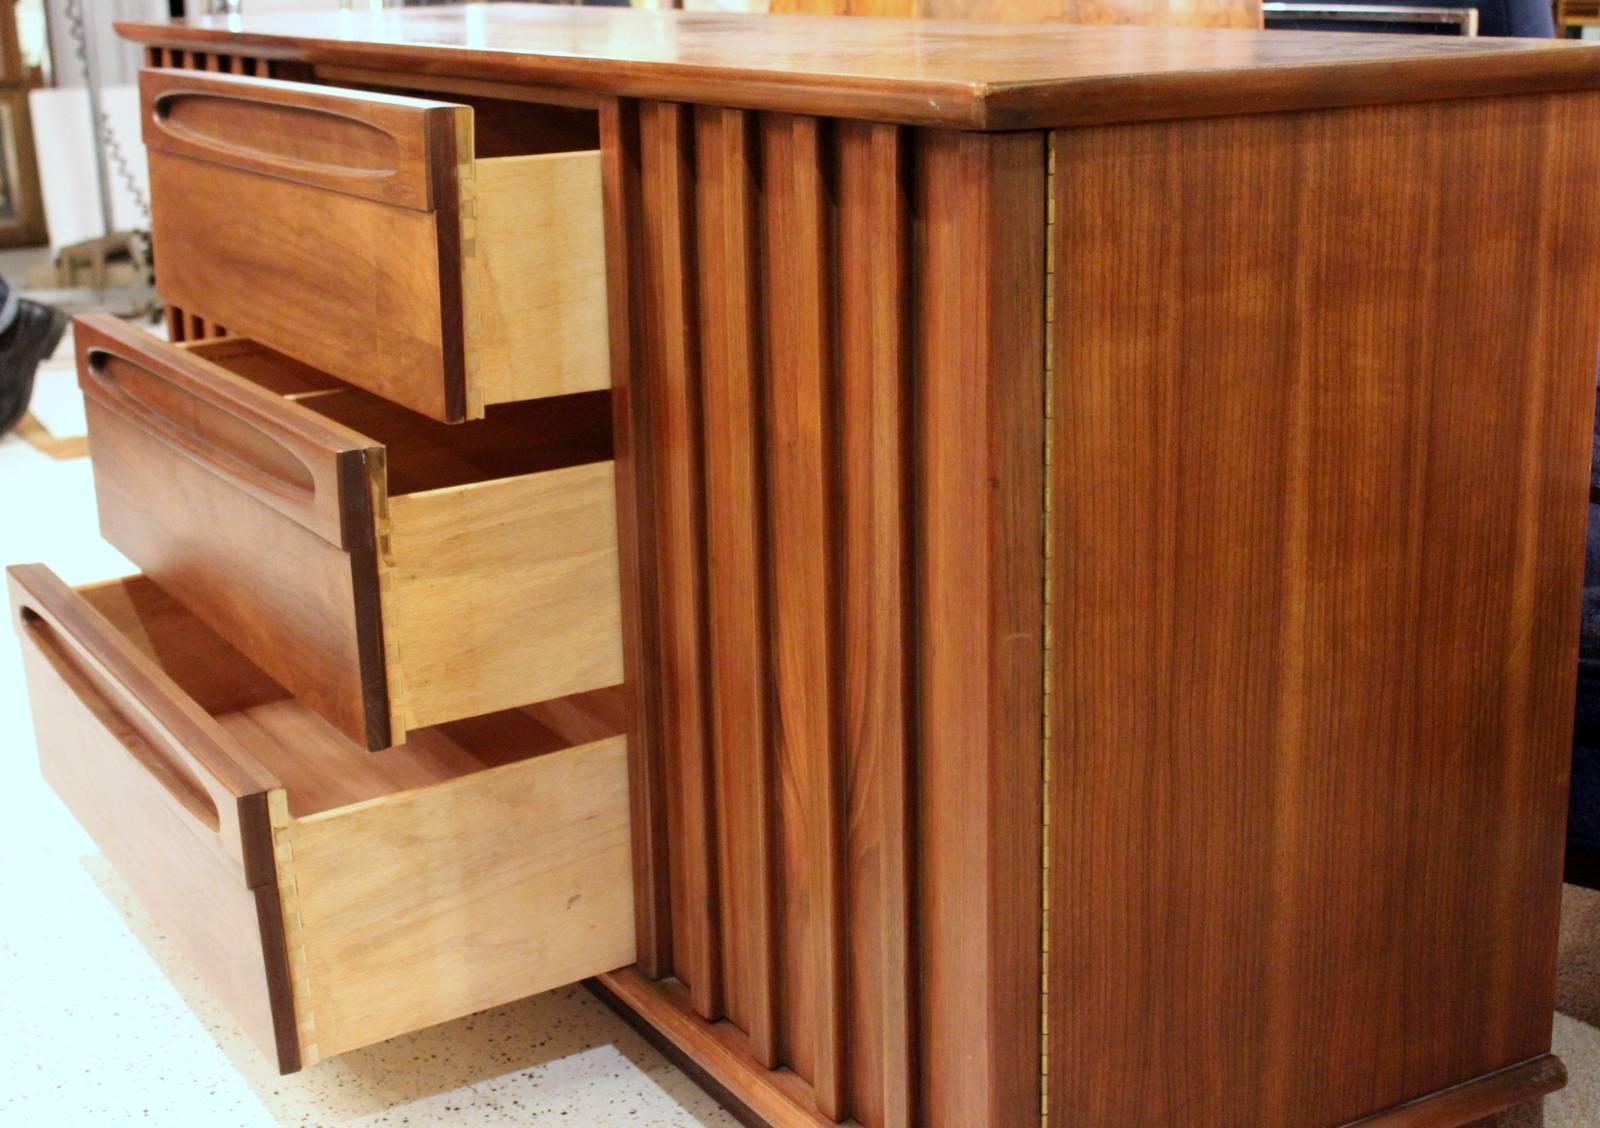 American of Martinsville Mid-Century walnut credenza.  Three centered drawers flanked by slatted doors revealing one fixed shelf on each side. The drawer handles are very tailored and recessed to give a clean live to the drawers. Fine American made